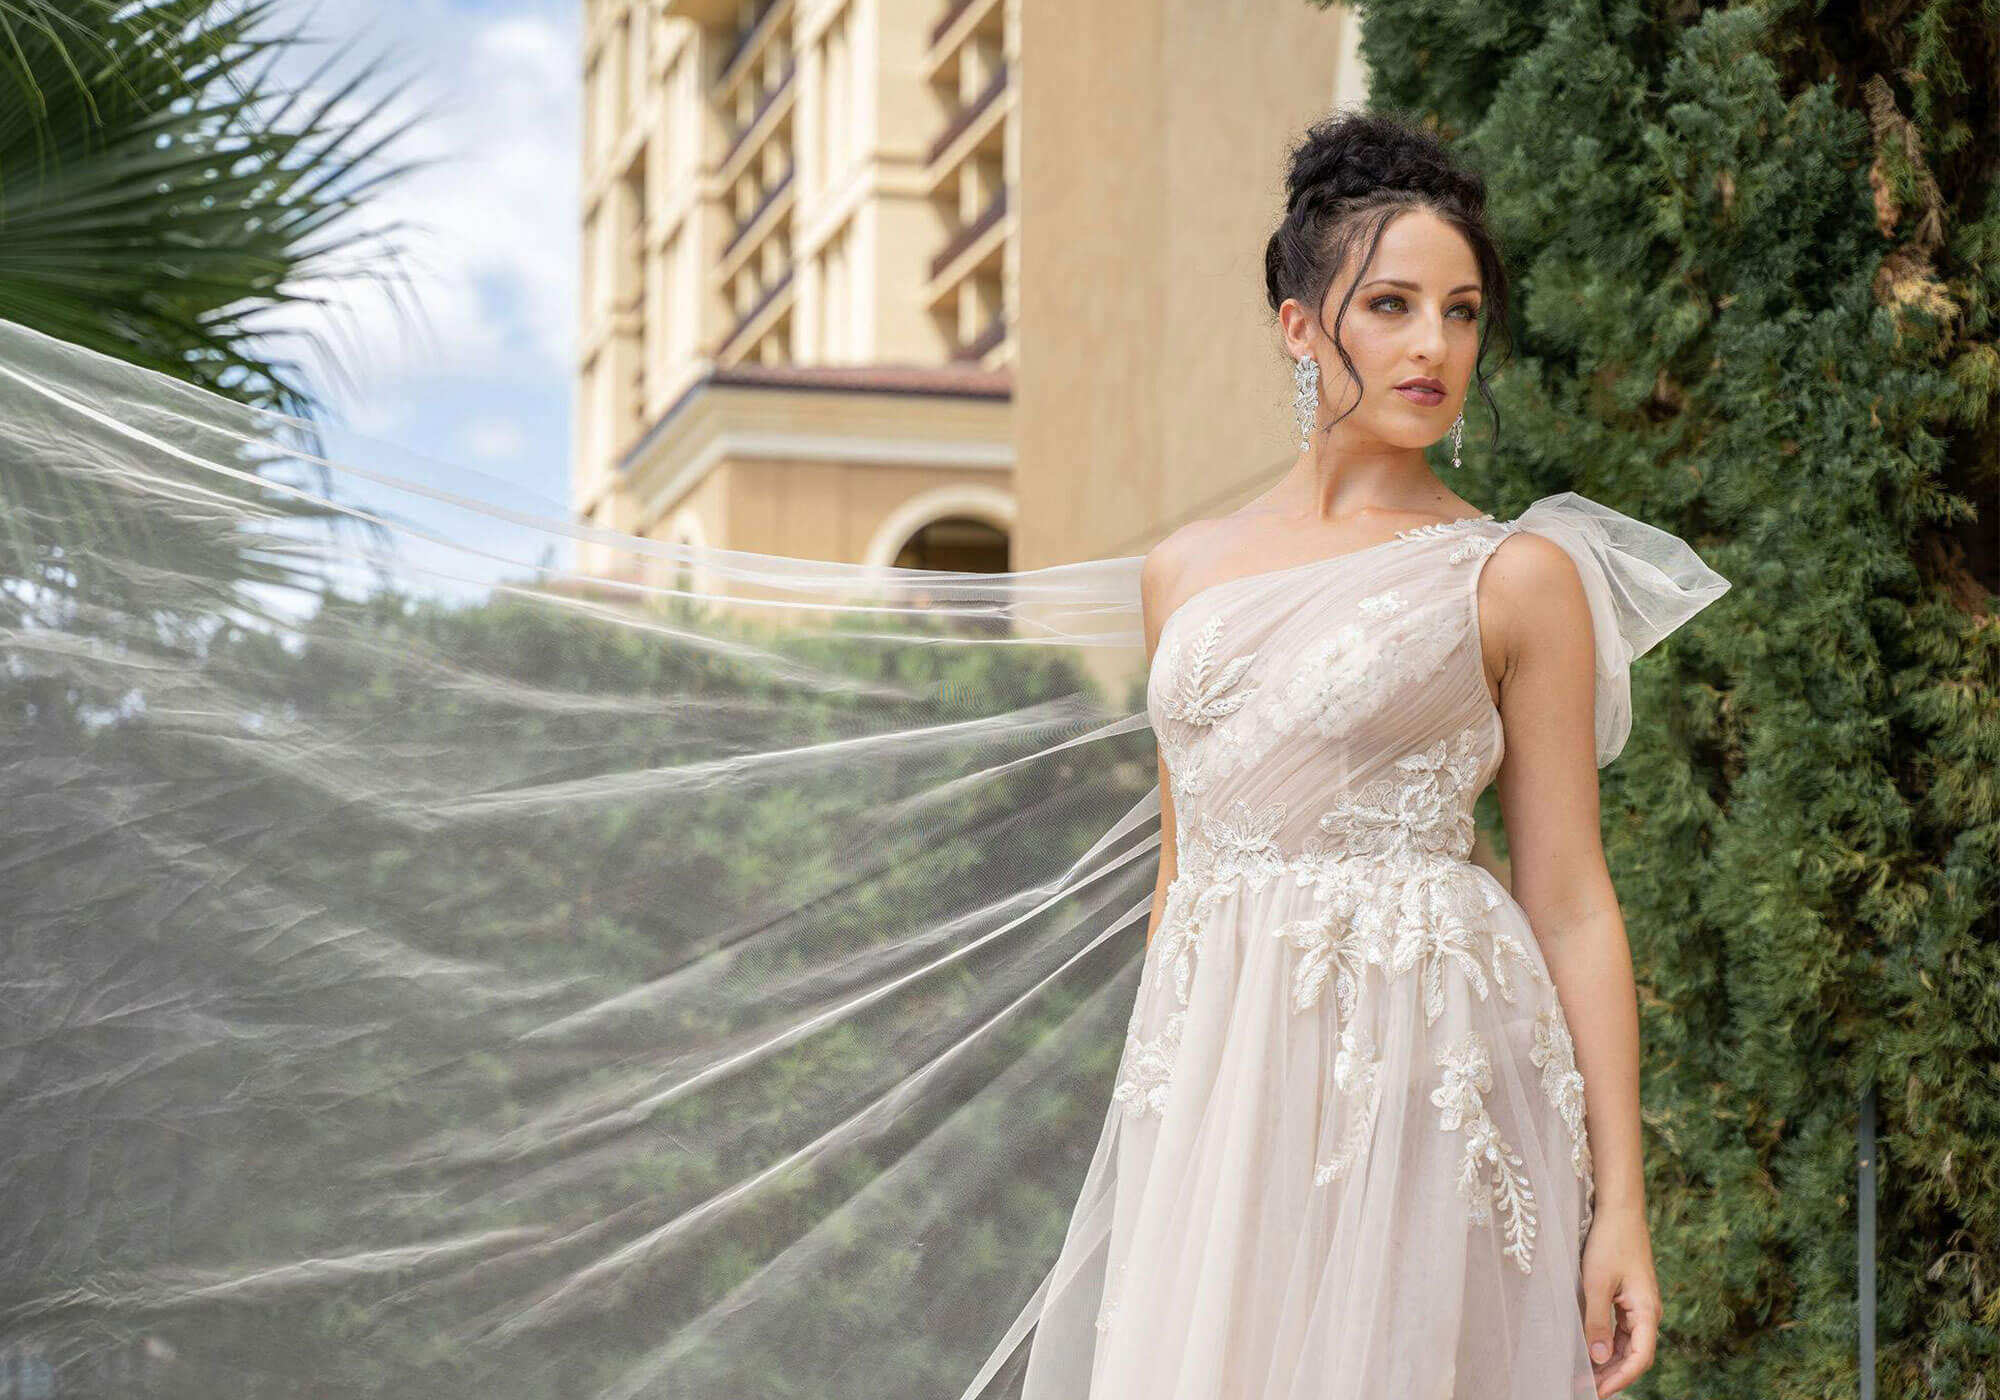 Order Custom Wedding Dresses & Couture Gown